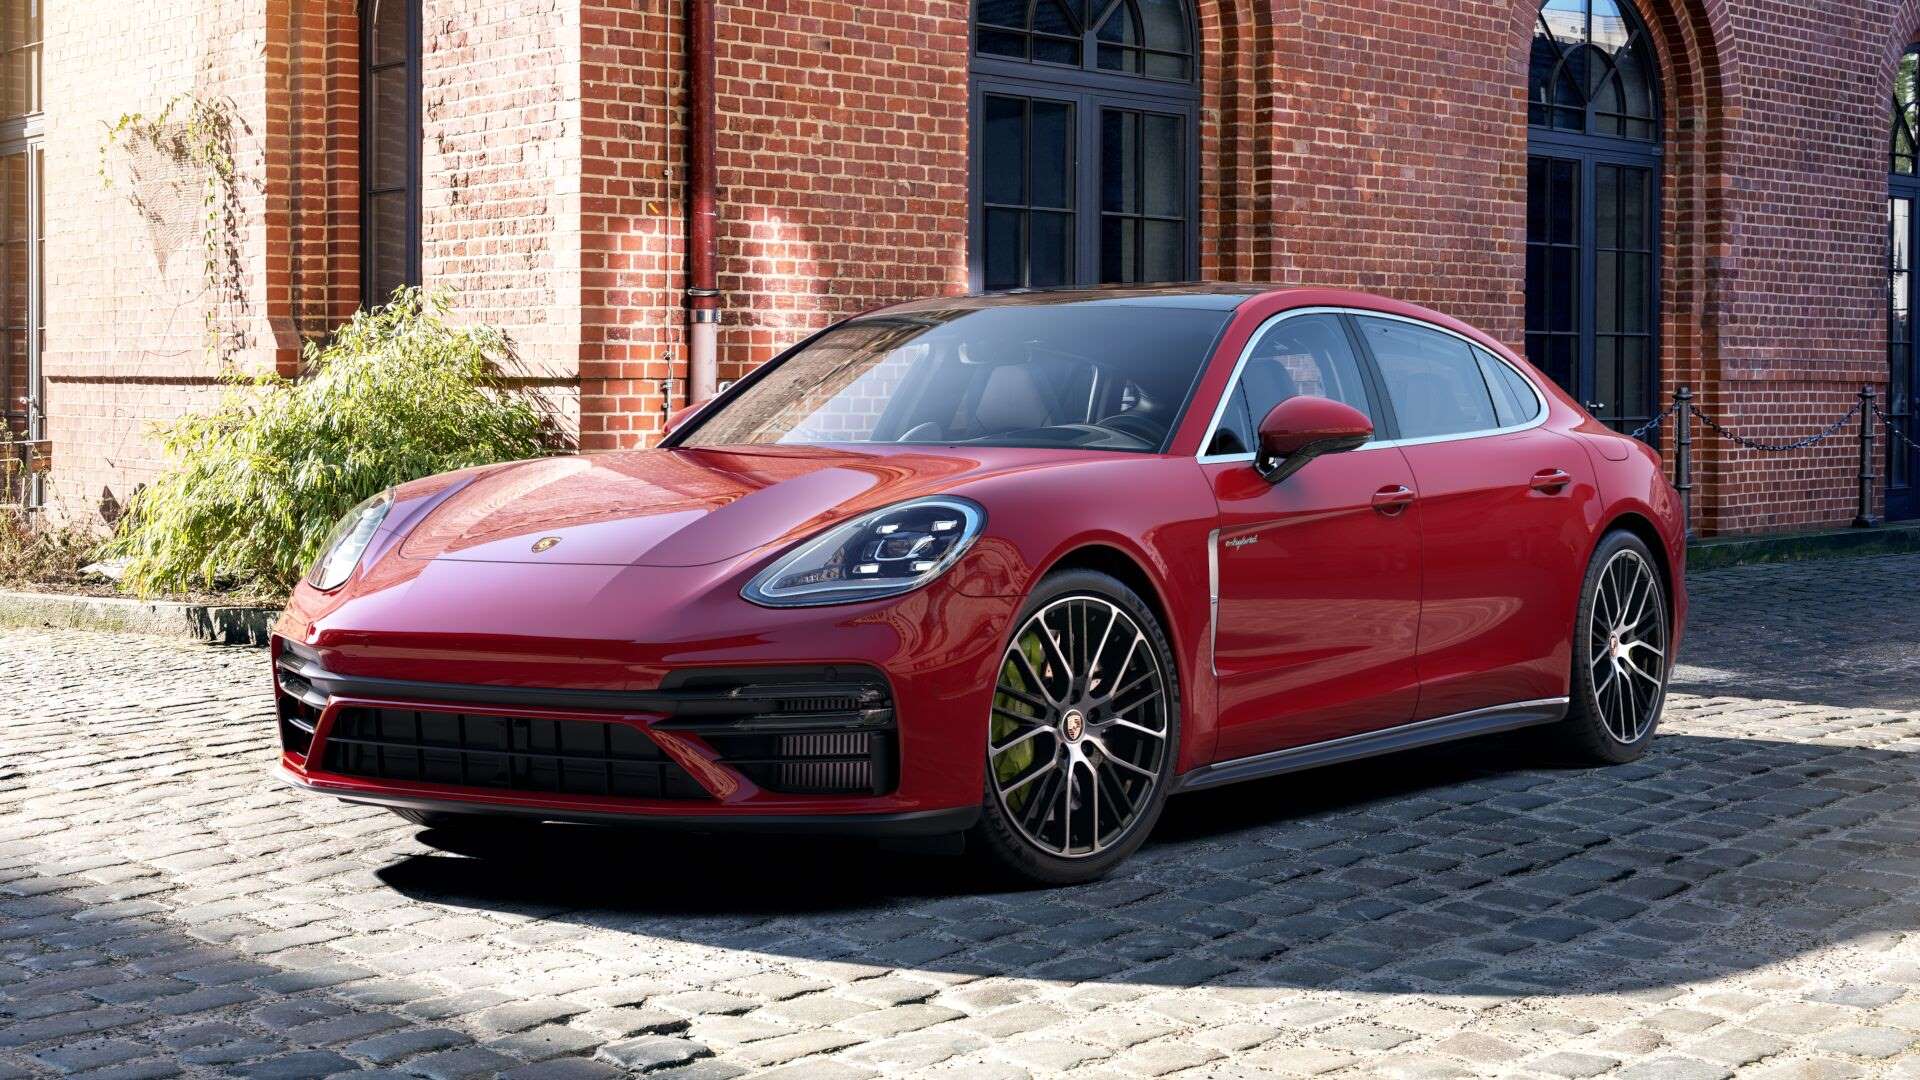 Fully loaded new Carmine Red 2022 Porsche Panamera Turbo S E-Hybrid Executive parked next to a large brick building